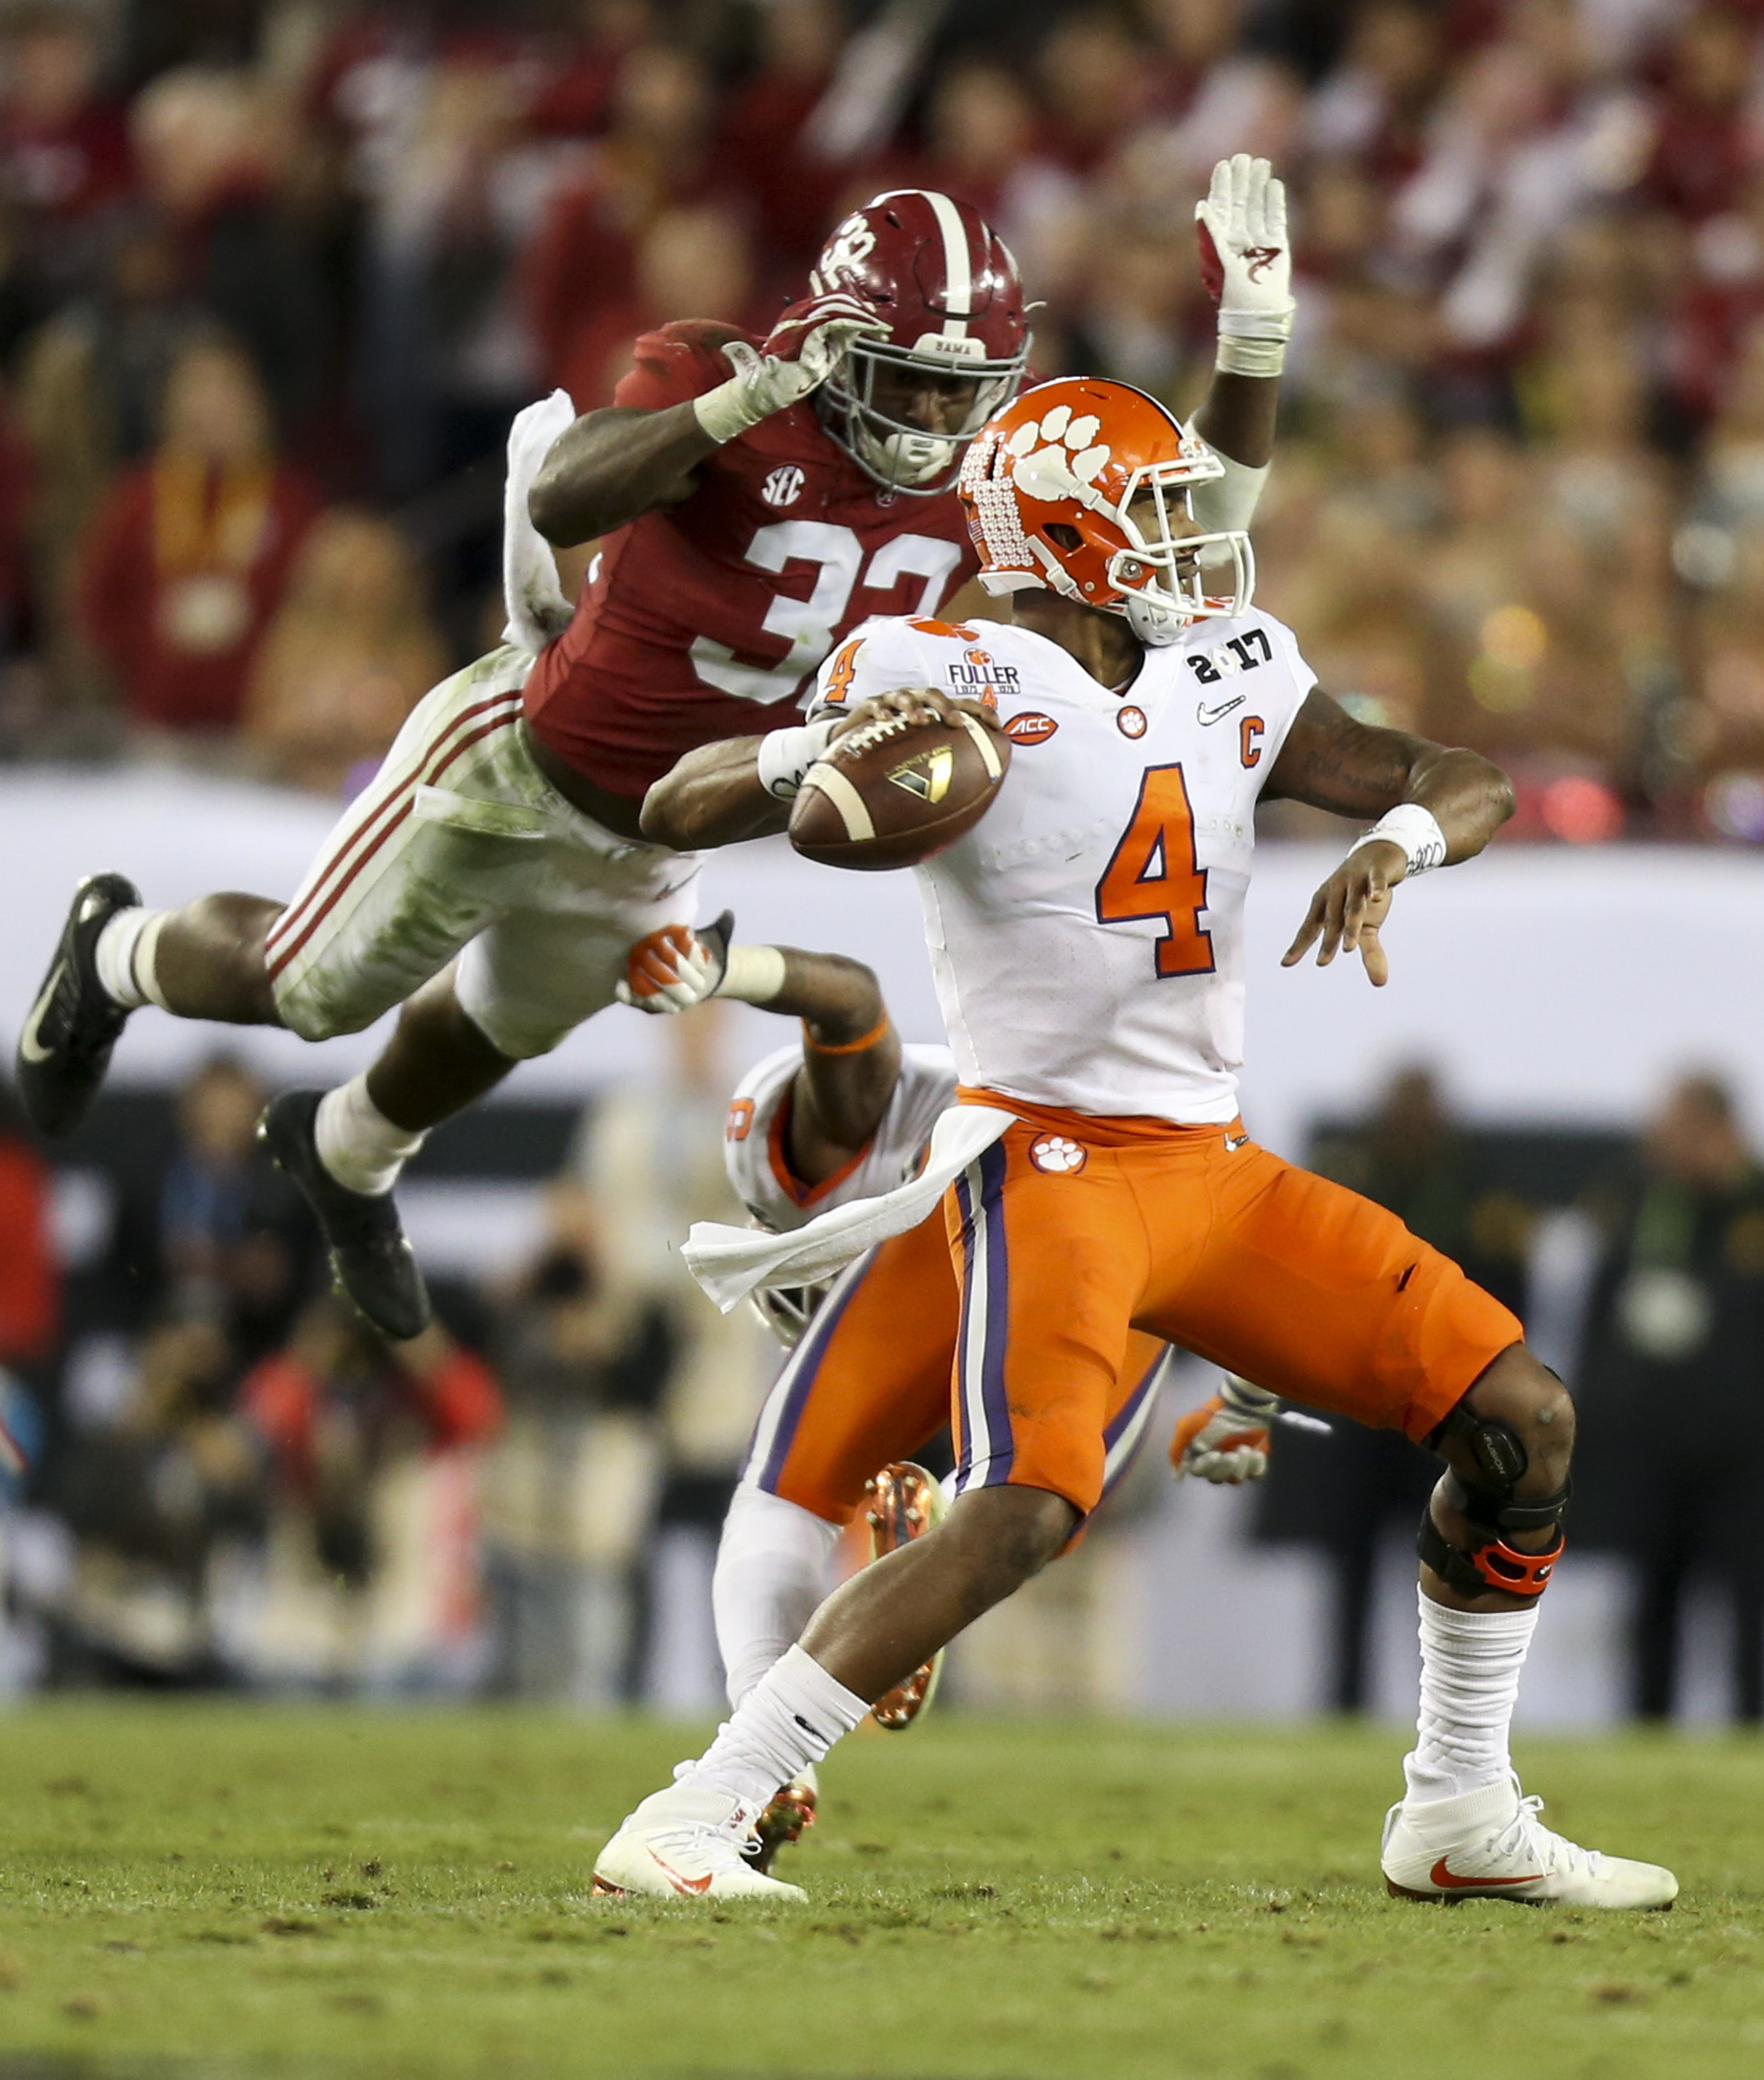  Clemson Tigers quarterback Deshaun Watson (4) prepares to throw the ball as Alabama Crimson Tide linebacker Rashaan Evans (32) leaps to tackle Watson during the second half of the College Football Playoff National Championship game in Tampa, FL. The